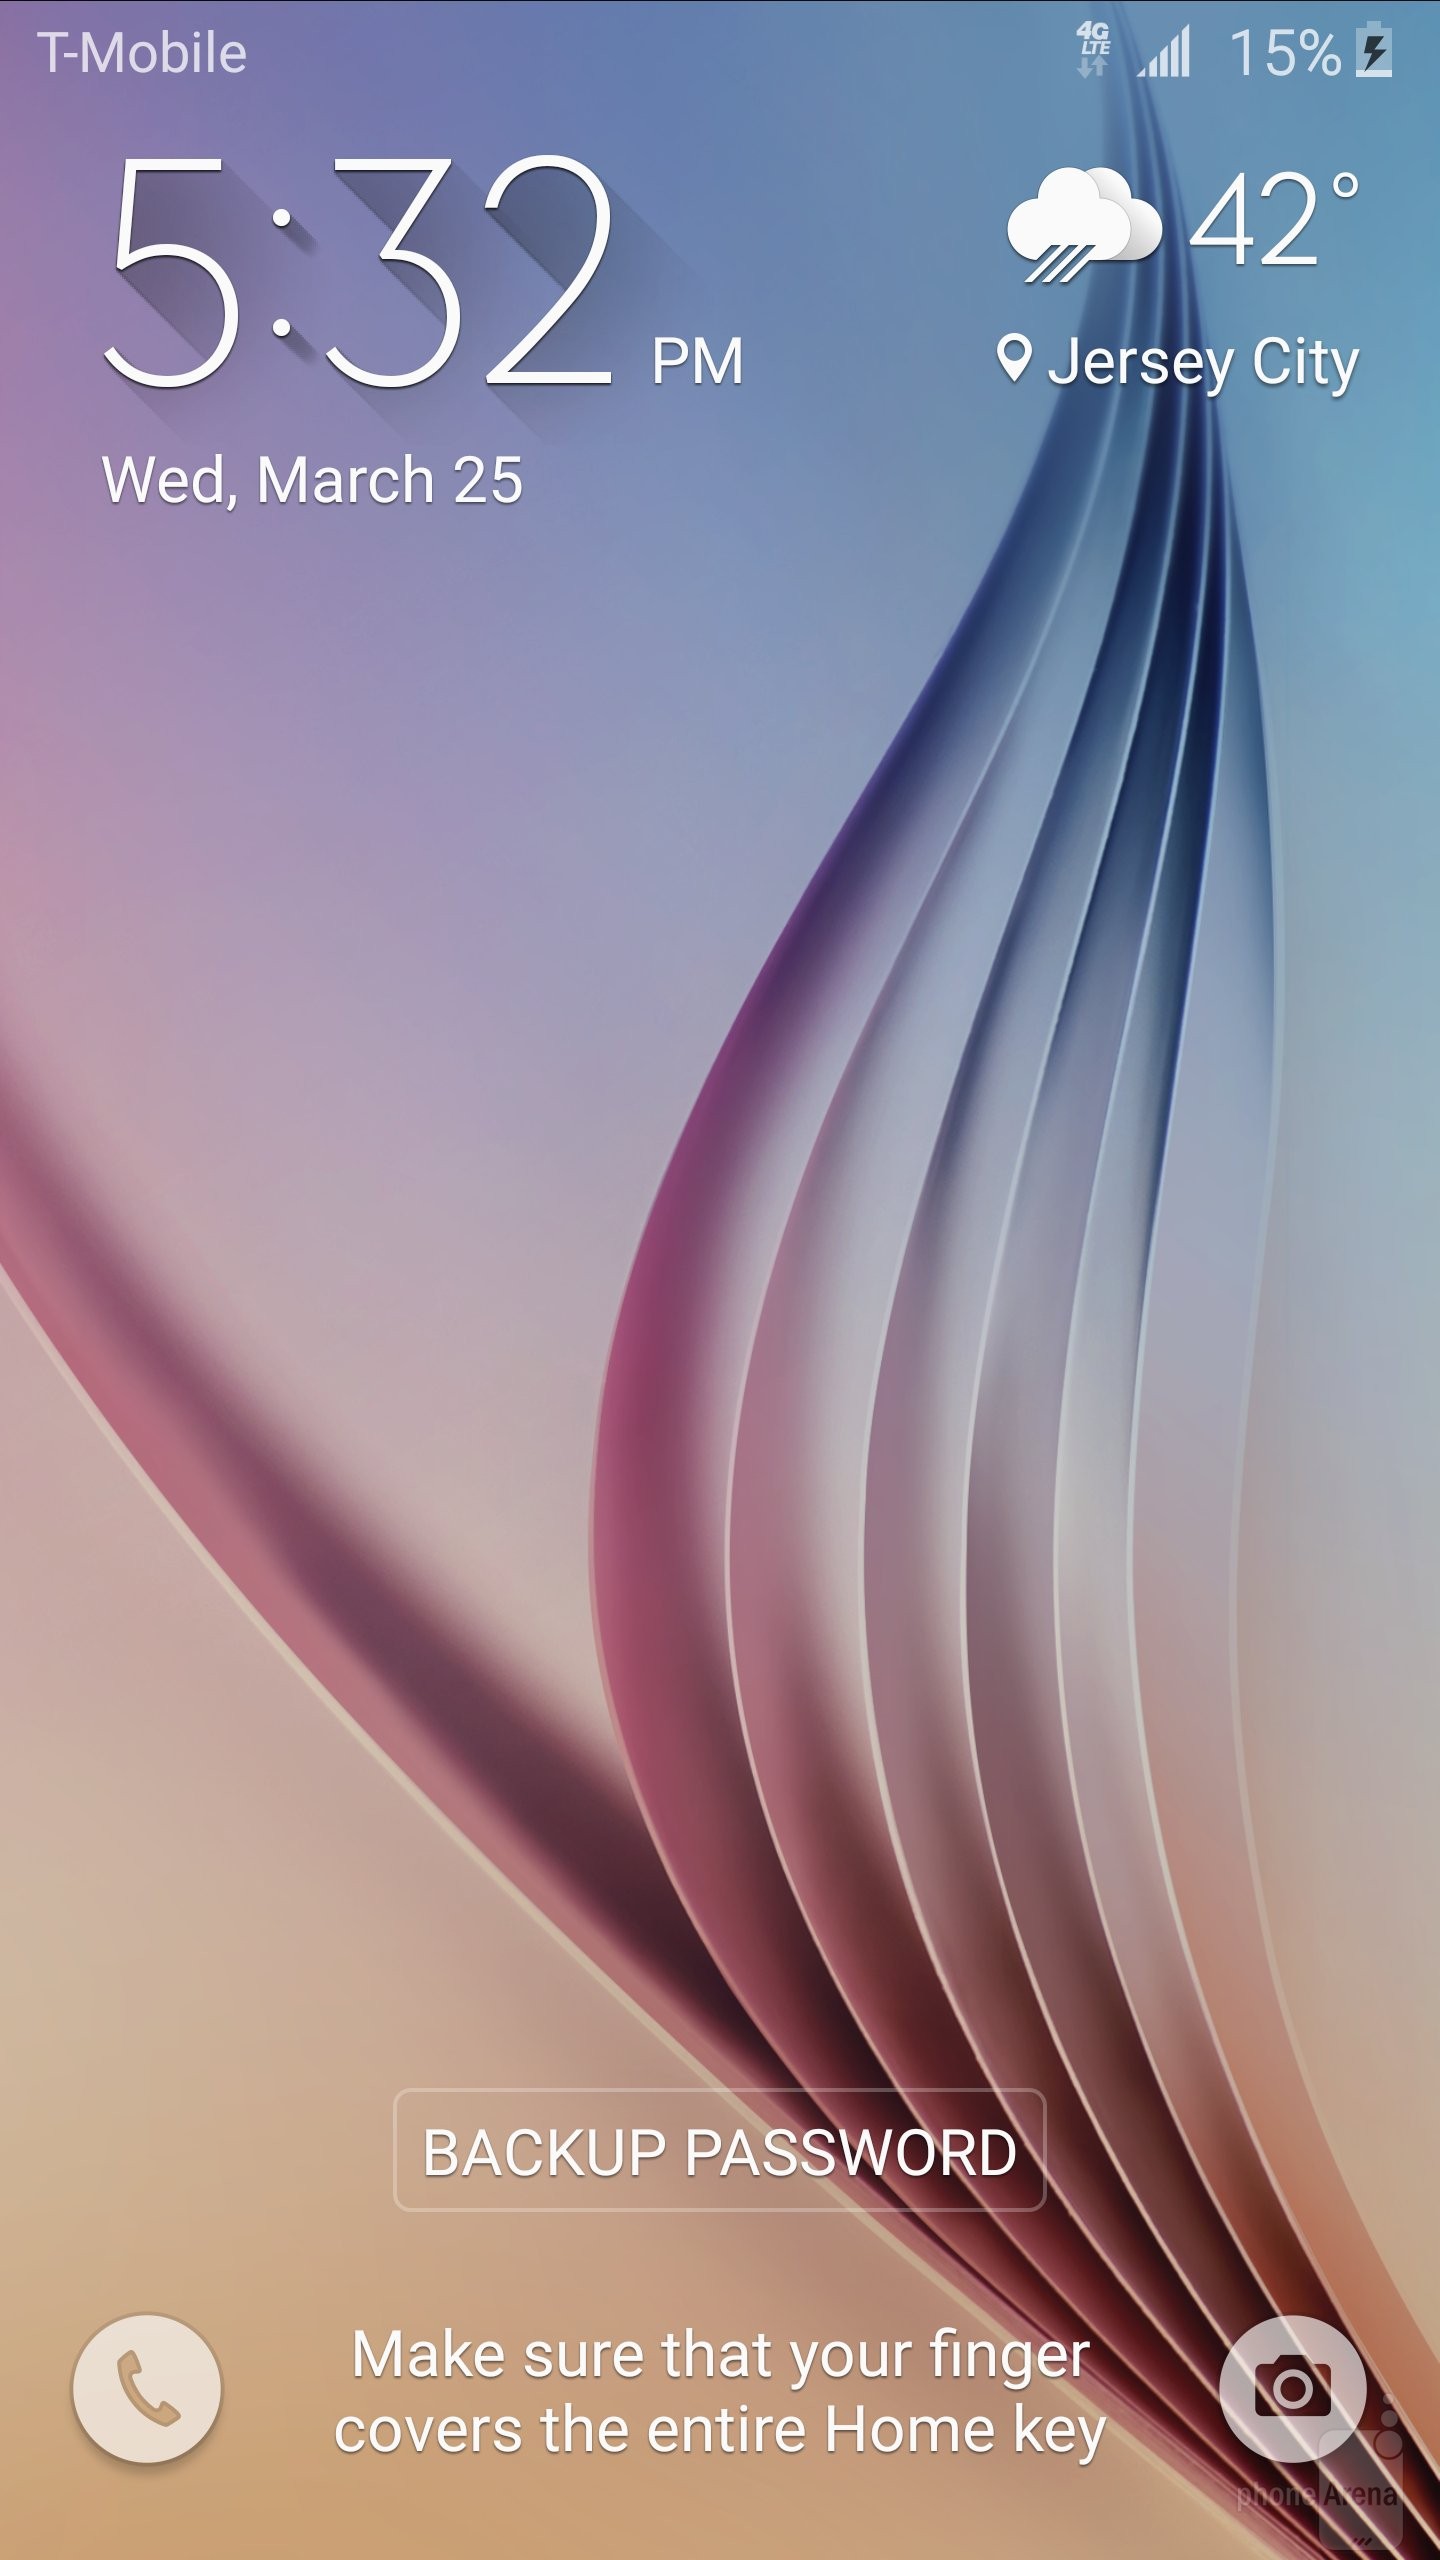 Samsung's Latest Iteration Of Touchwiz On The Galaxy - Samsung Galaxy S6 , HD Wallpaper & Backgrounds